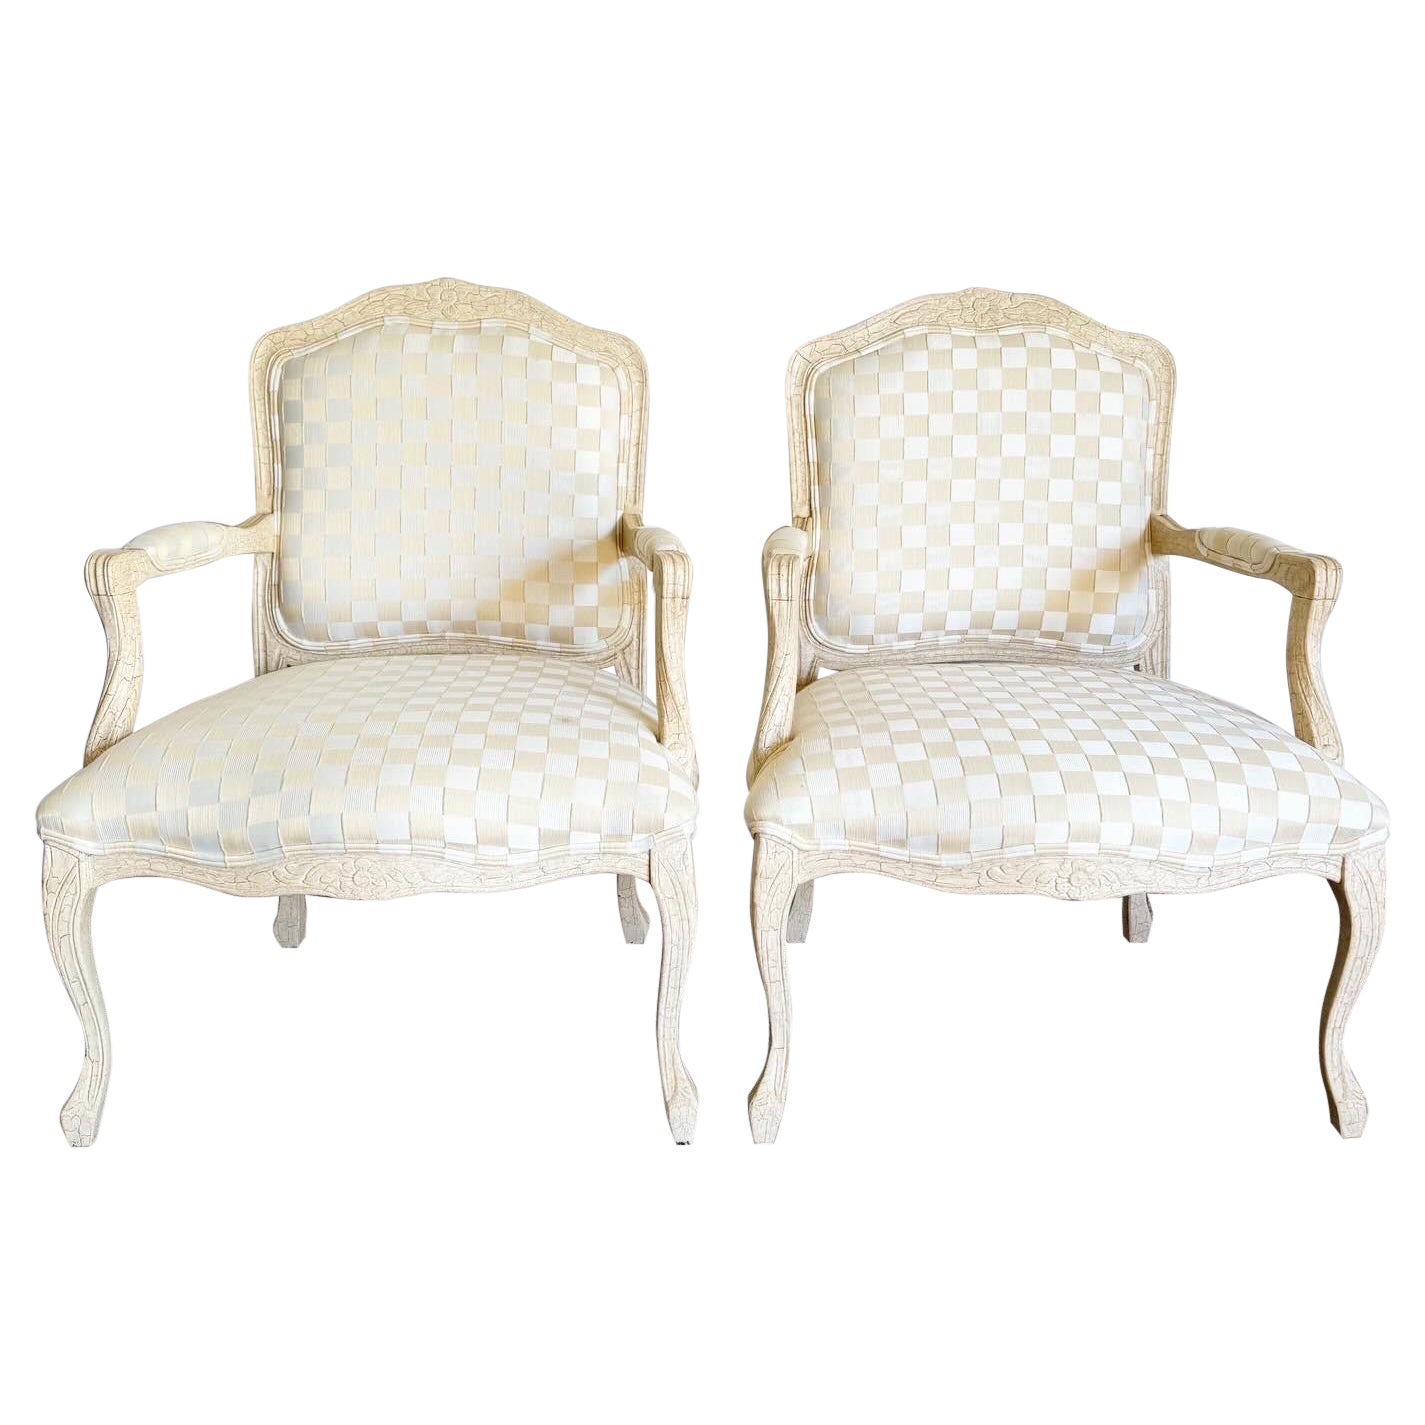 Vintage Regency Cream Crackled Finish Arm Chairs - a Pair For Sale